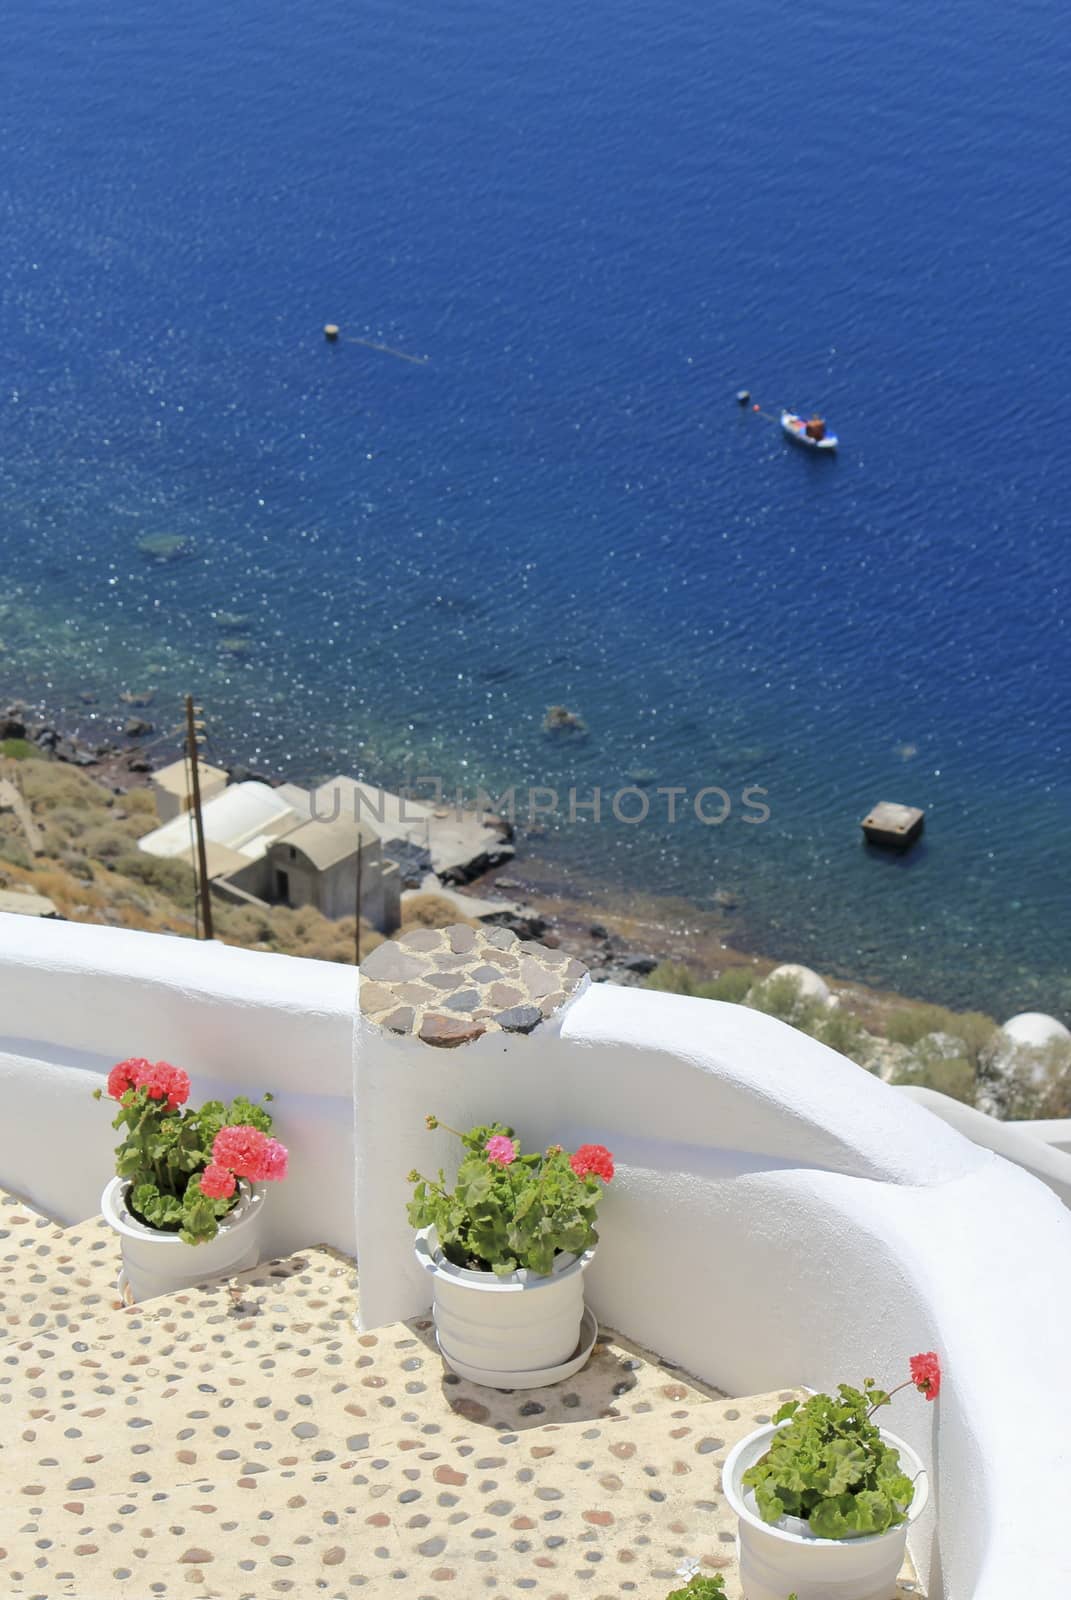 Stairs, flowers and sea at Oia island, Greece by Elenaphotos21